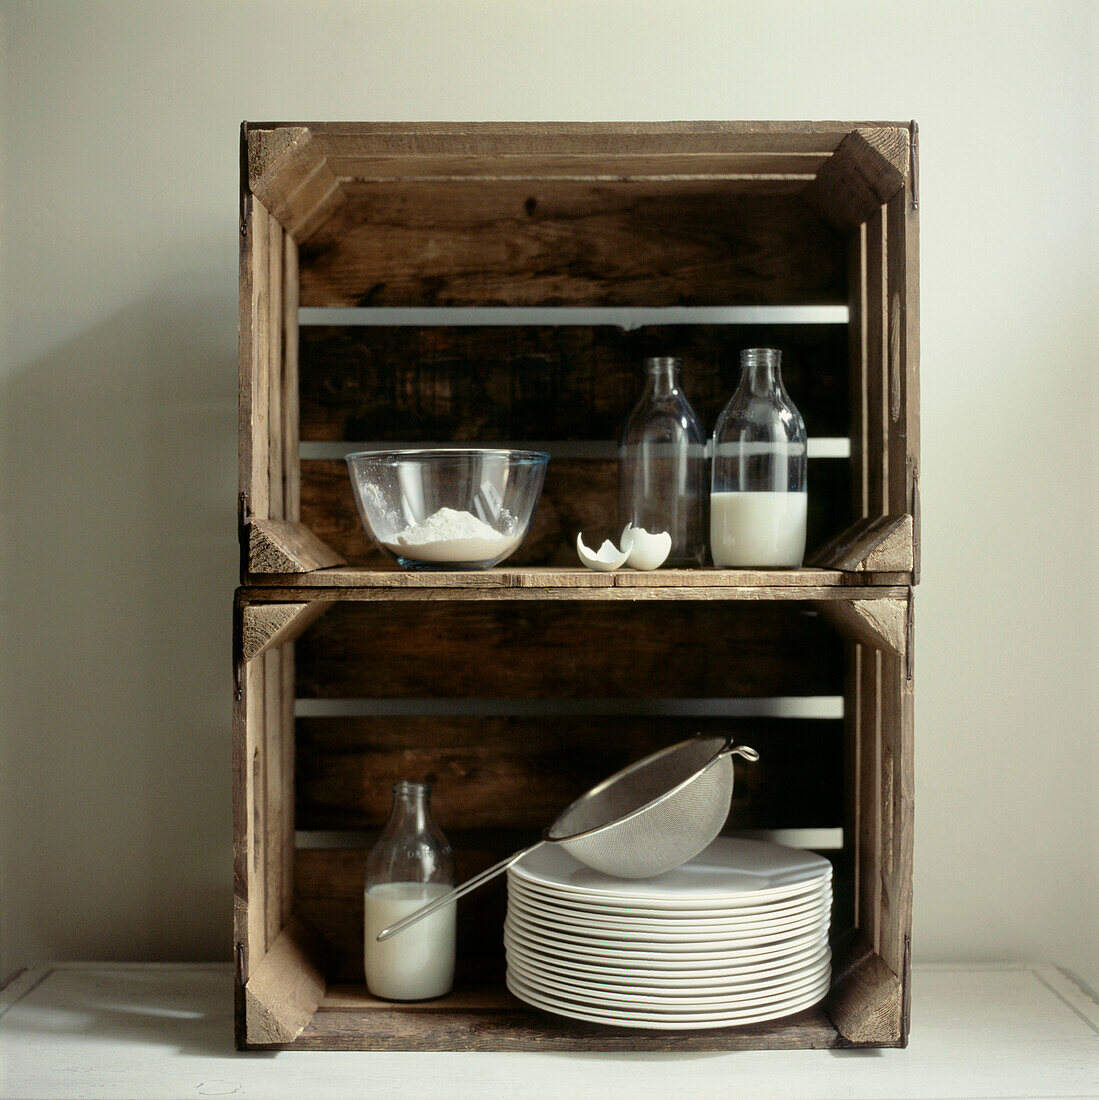 Make shift storage units from old wooden crates containing kitchenware